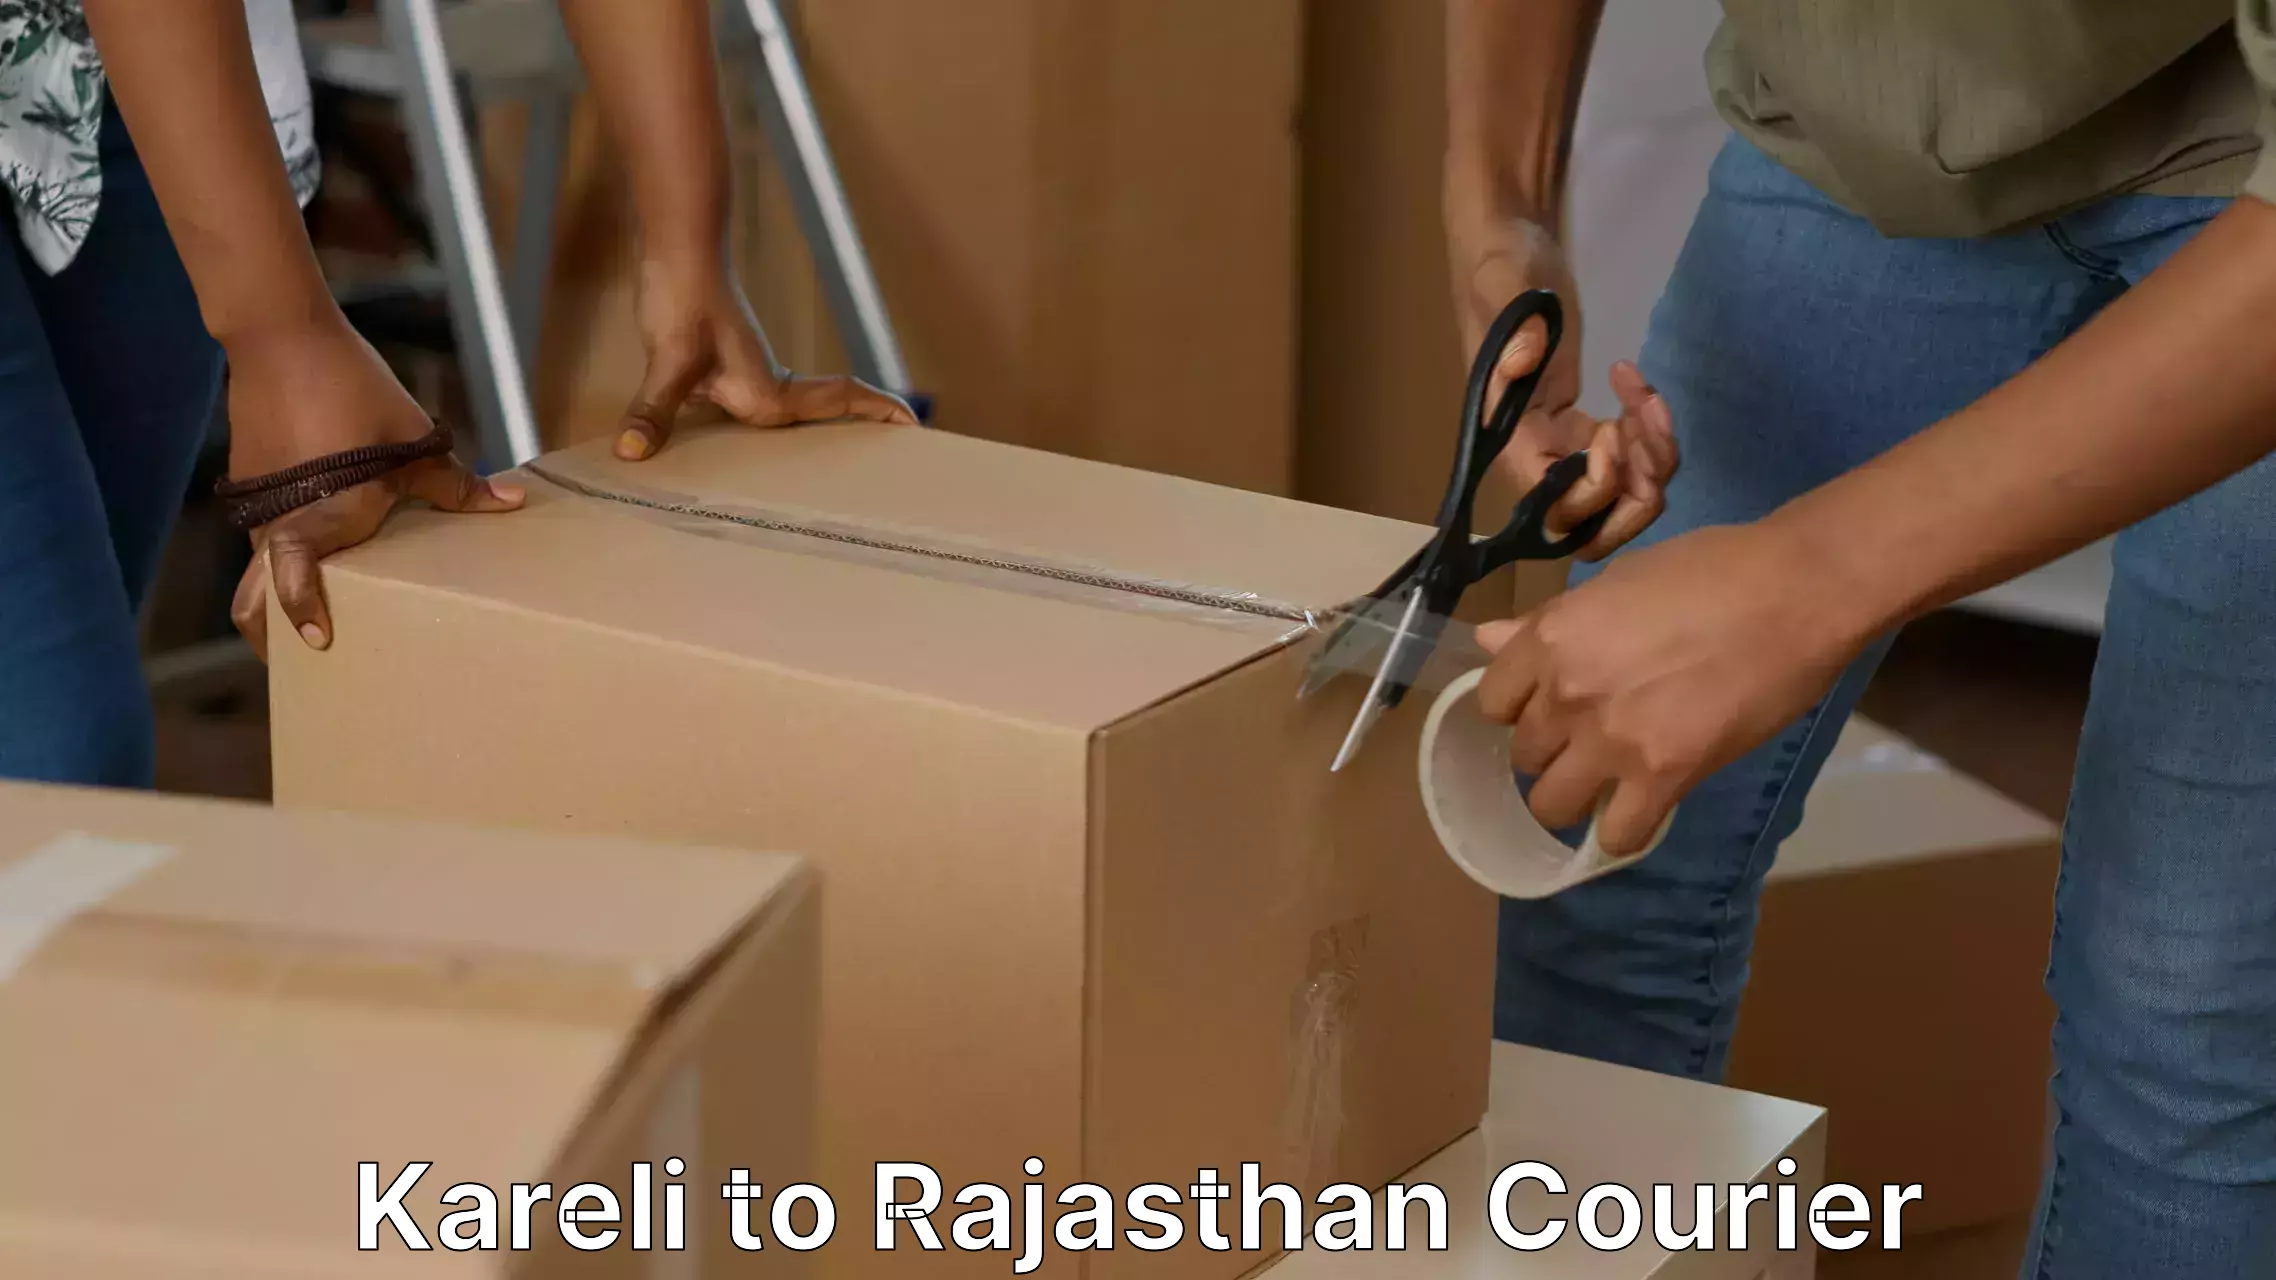 Professional movers and packers Kareli to Yeswanthapur